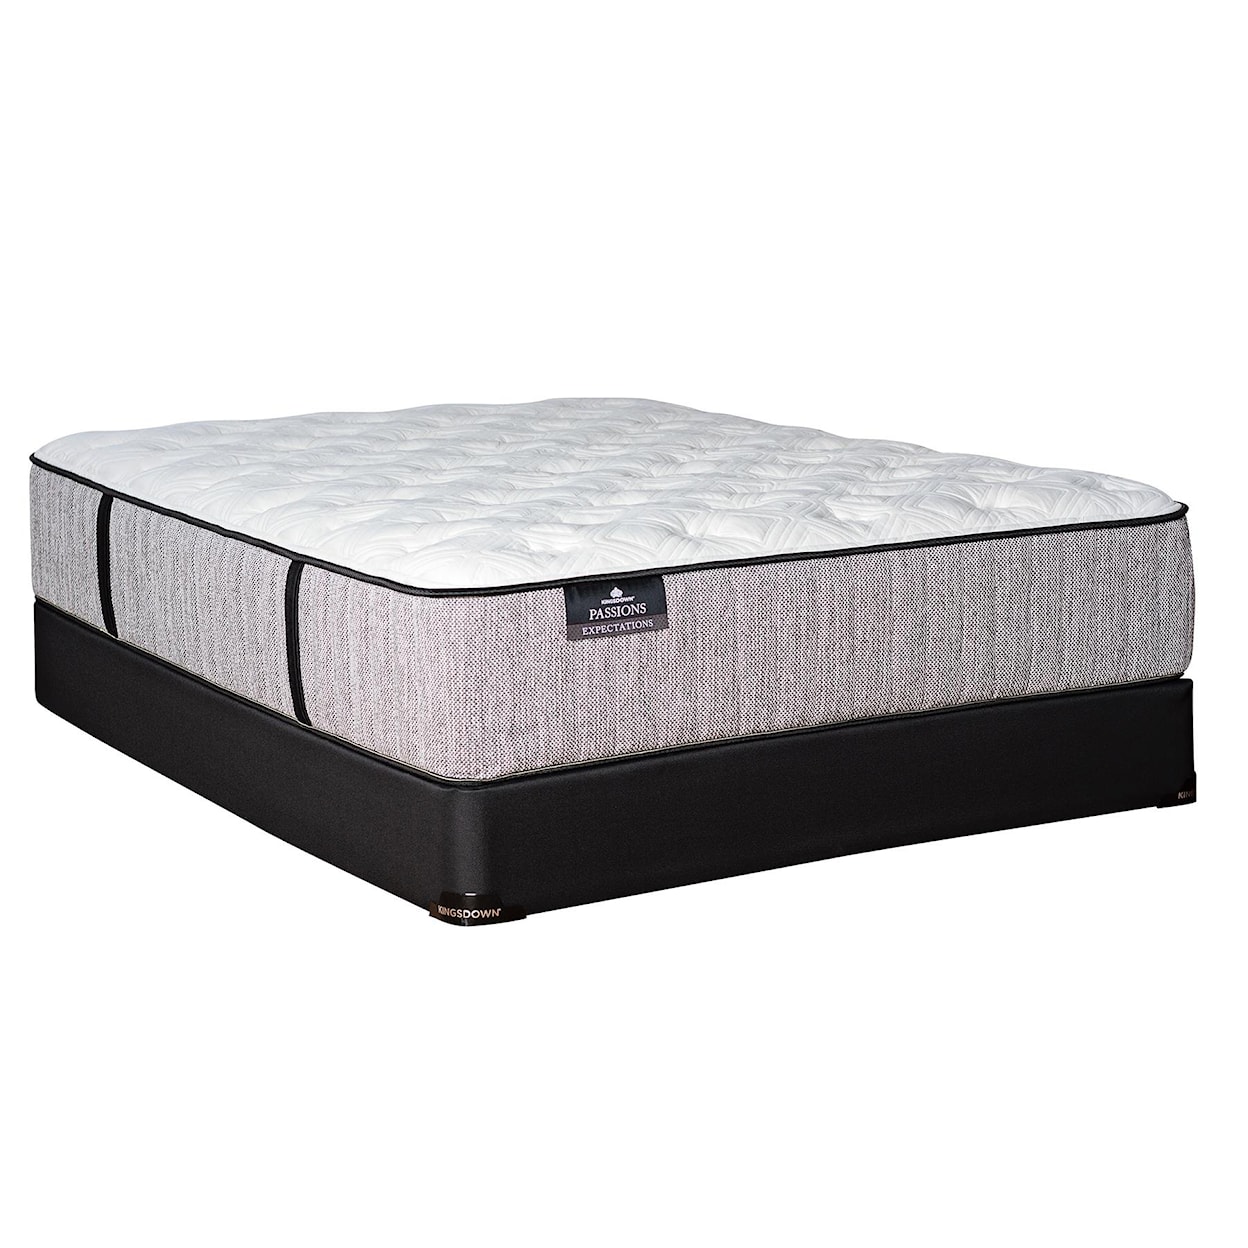 Kingsdown Passions Expectations Queen Plush Mattress Set with Gel Memory Foa